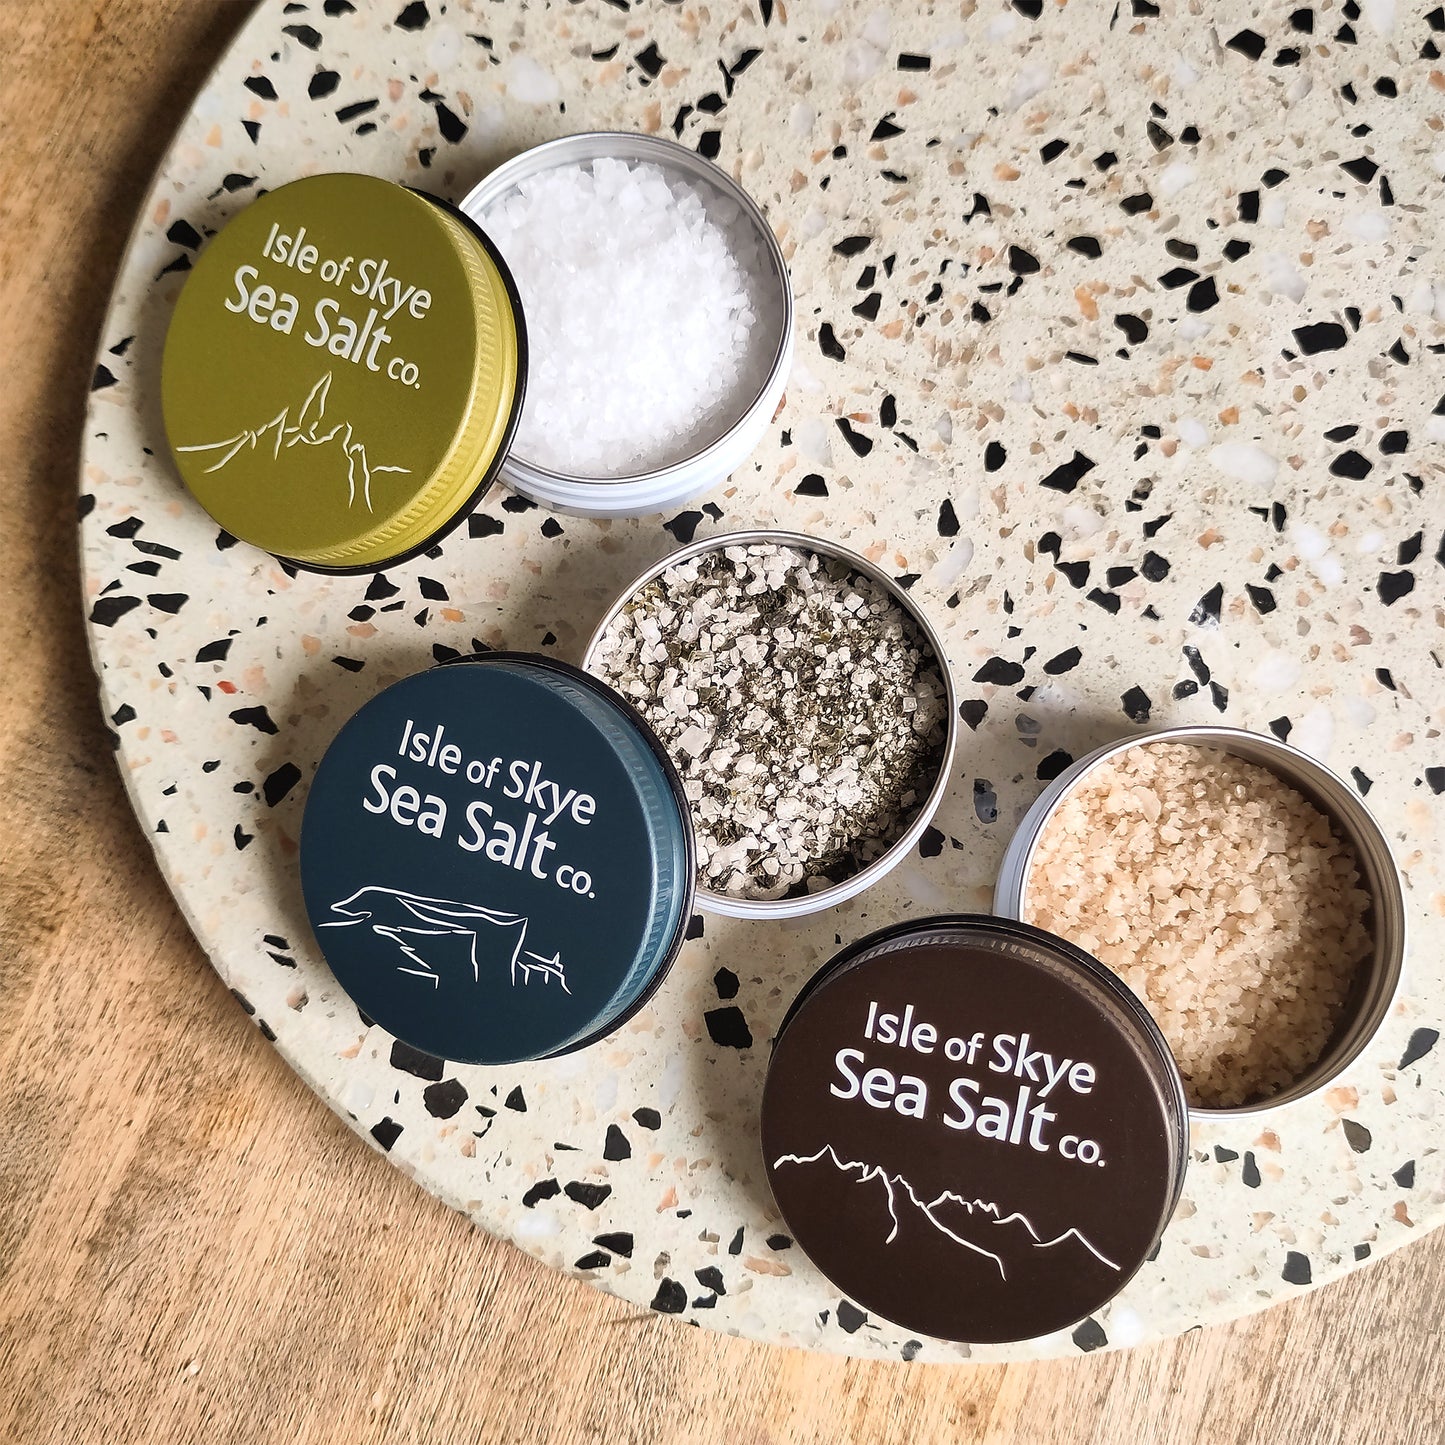 A Pinch of Skye - 3 x 25g Natural and Flavored Sea Salts Gift Set